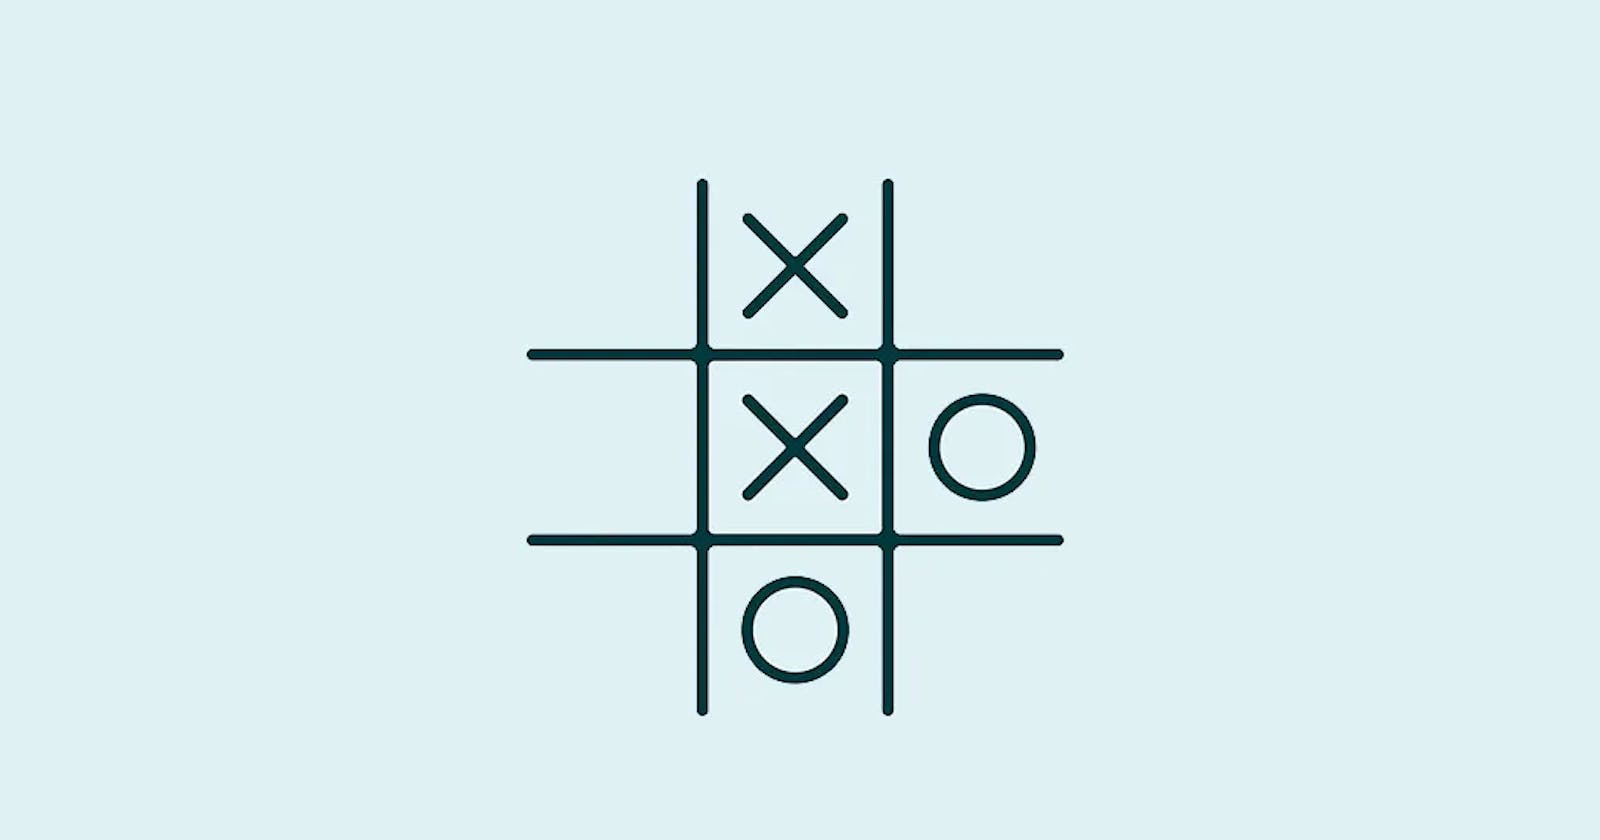 I Made A TIC TAC TOE GAME IN JAVA UNDER 20 MINUTES